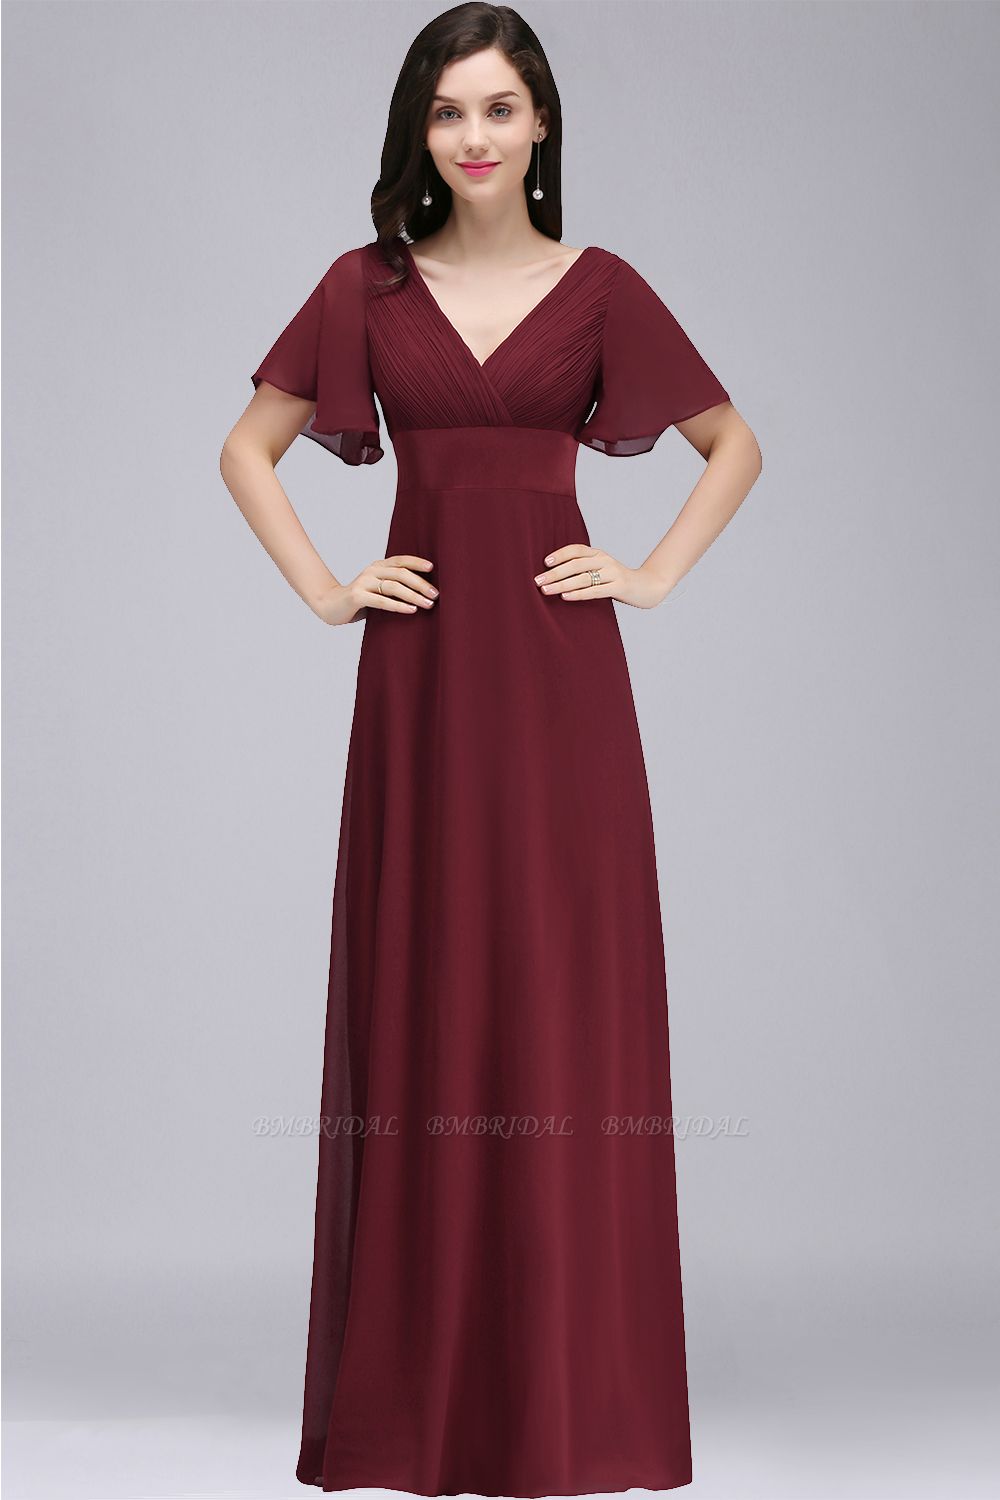 BMbridal Affordable Chiffon Burgundy Long Bridesmaid Dresses with Soft Pleats In Stock